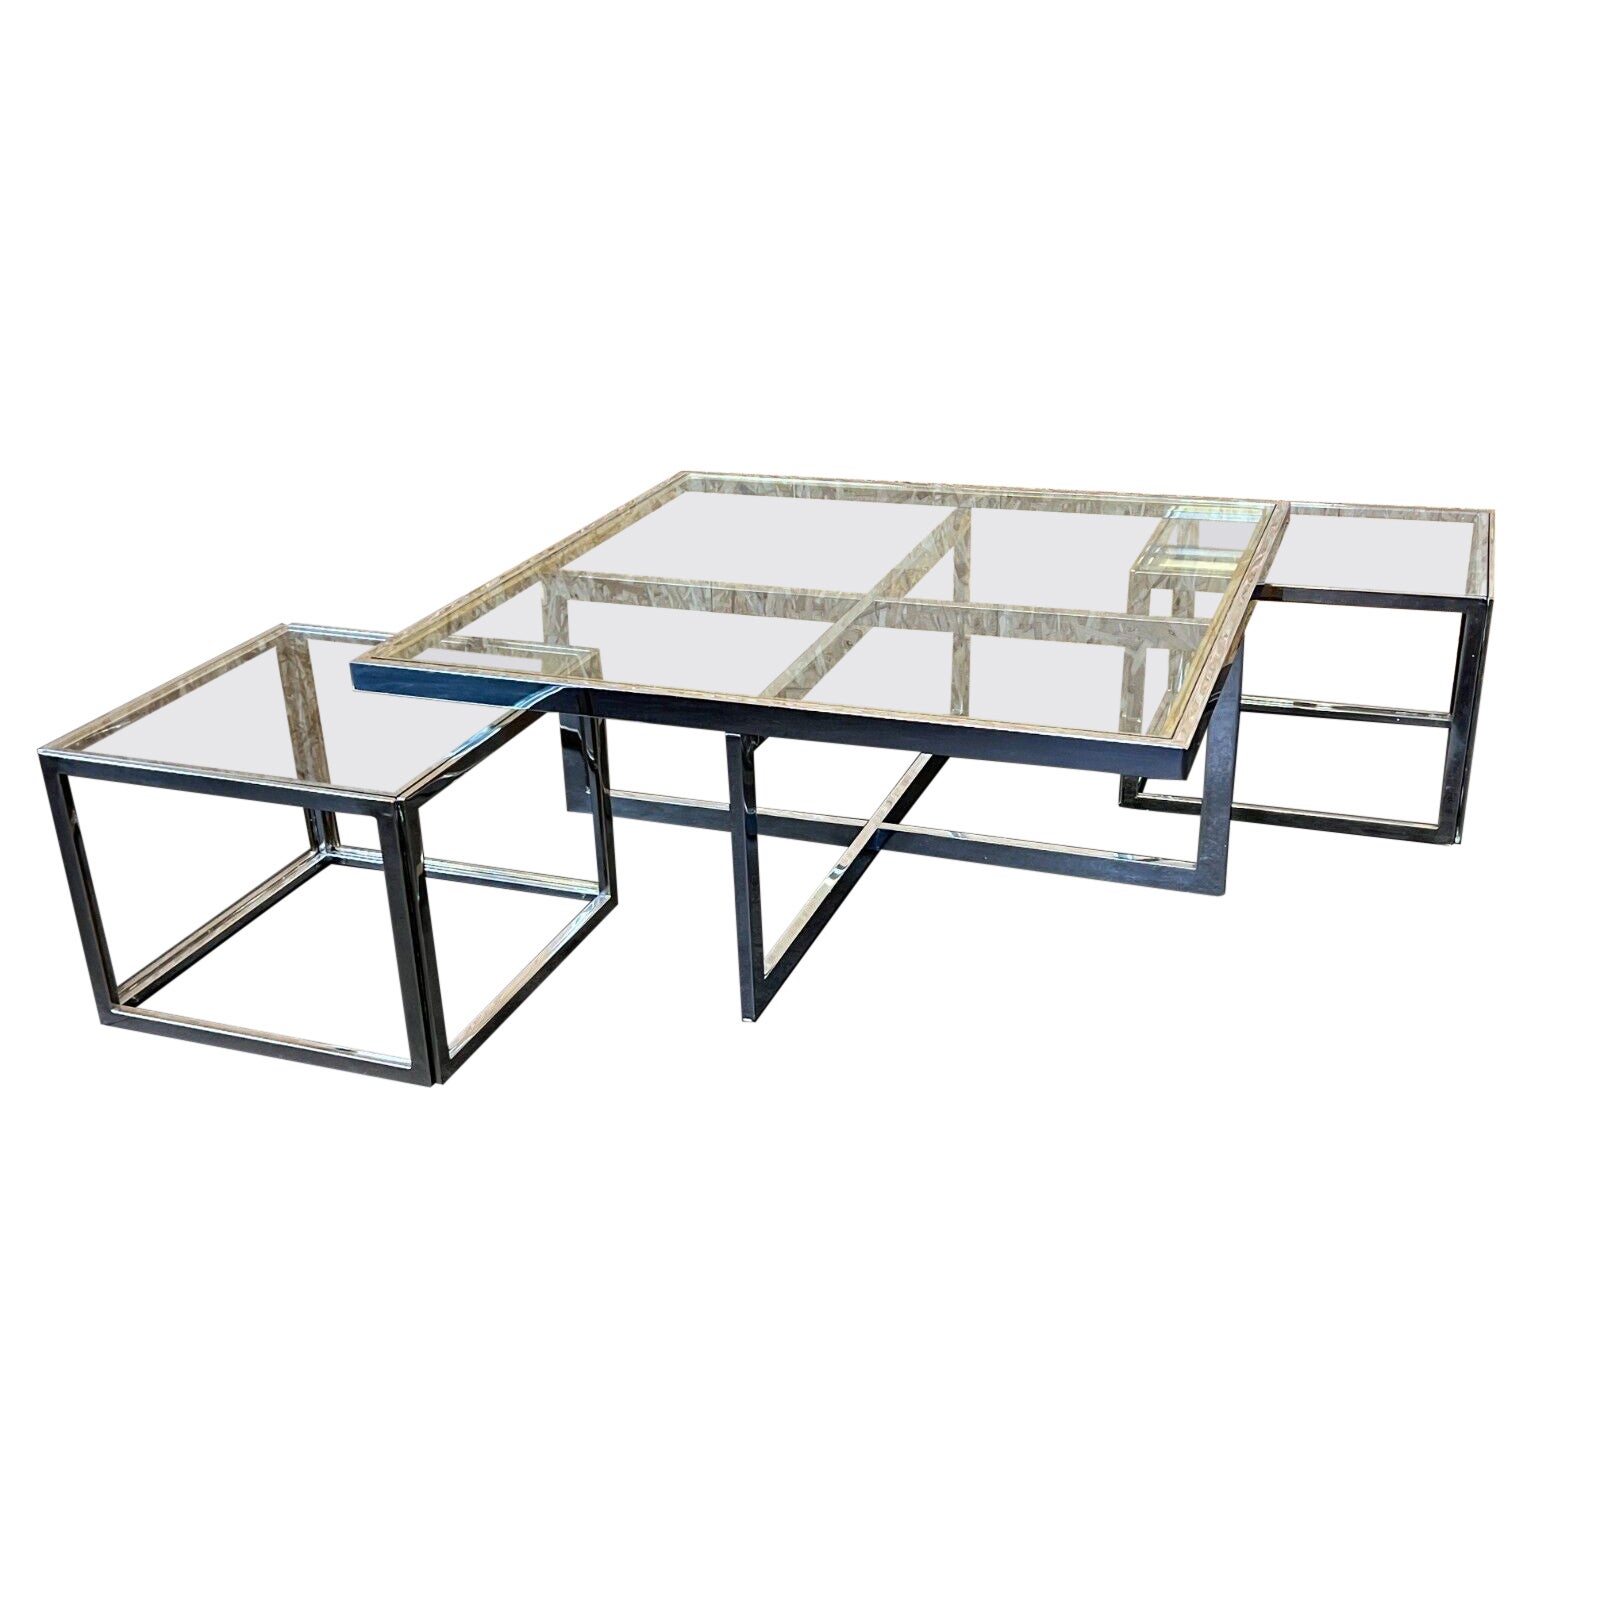 60s 70s Jean Charles Maison Huge Coffee Table Chrome & Brass 2 Nesting Tables For Sale